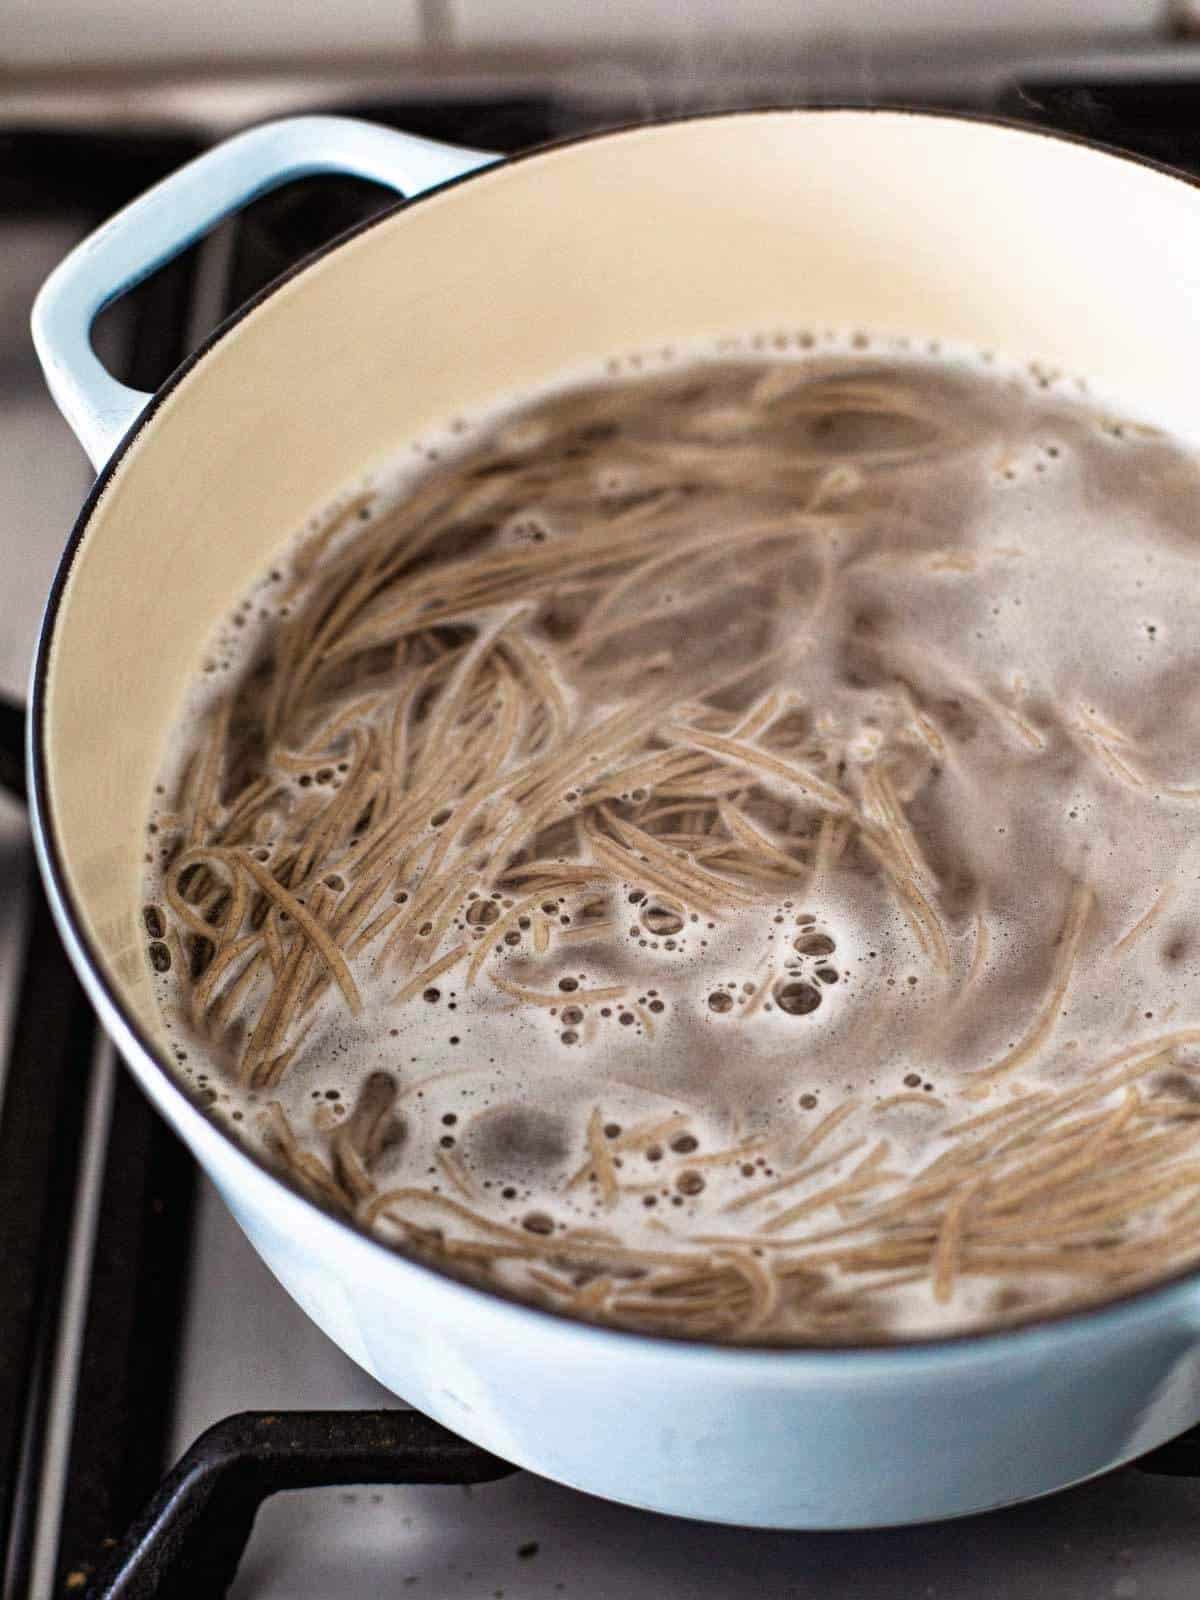 Soba noodles cooking in a pot.